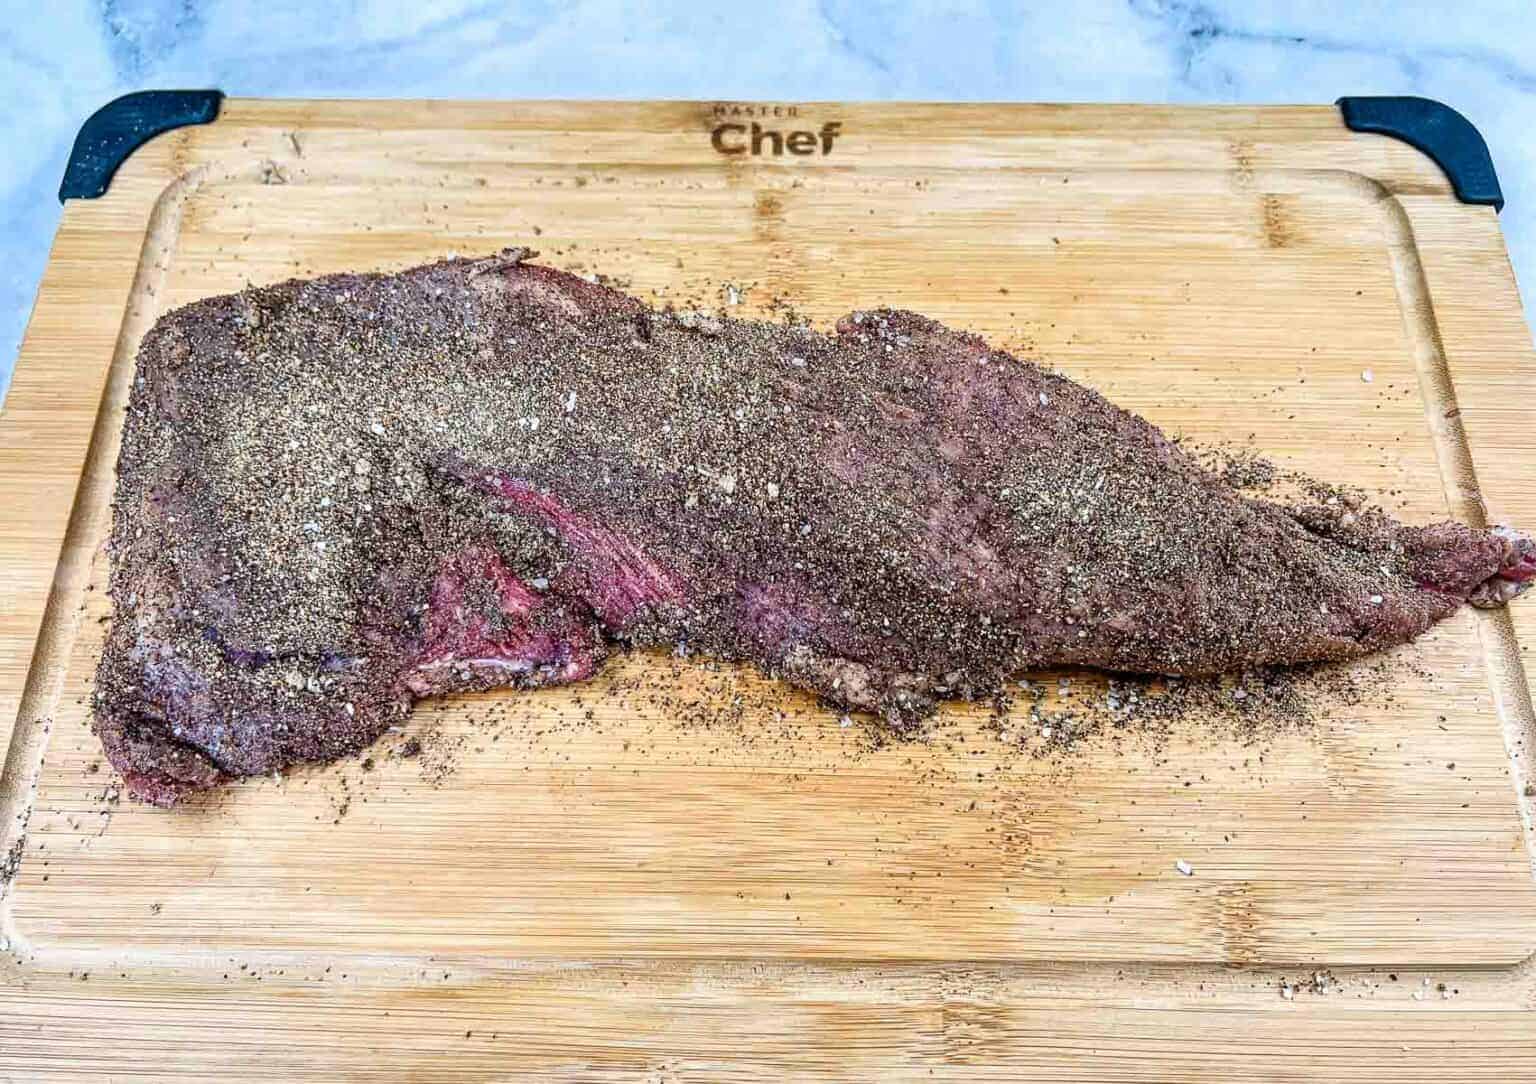 A piece of steak on a cutting board with rub on it.